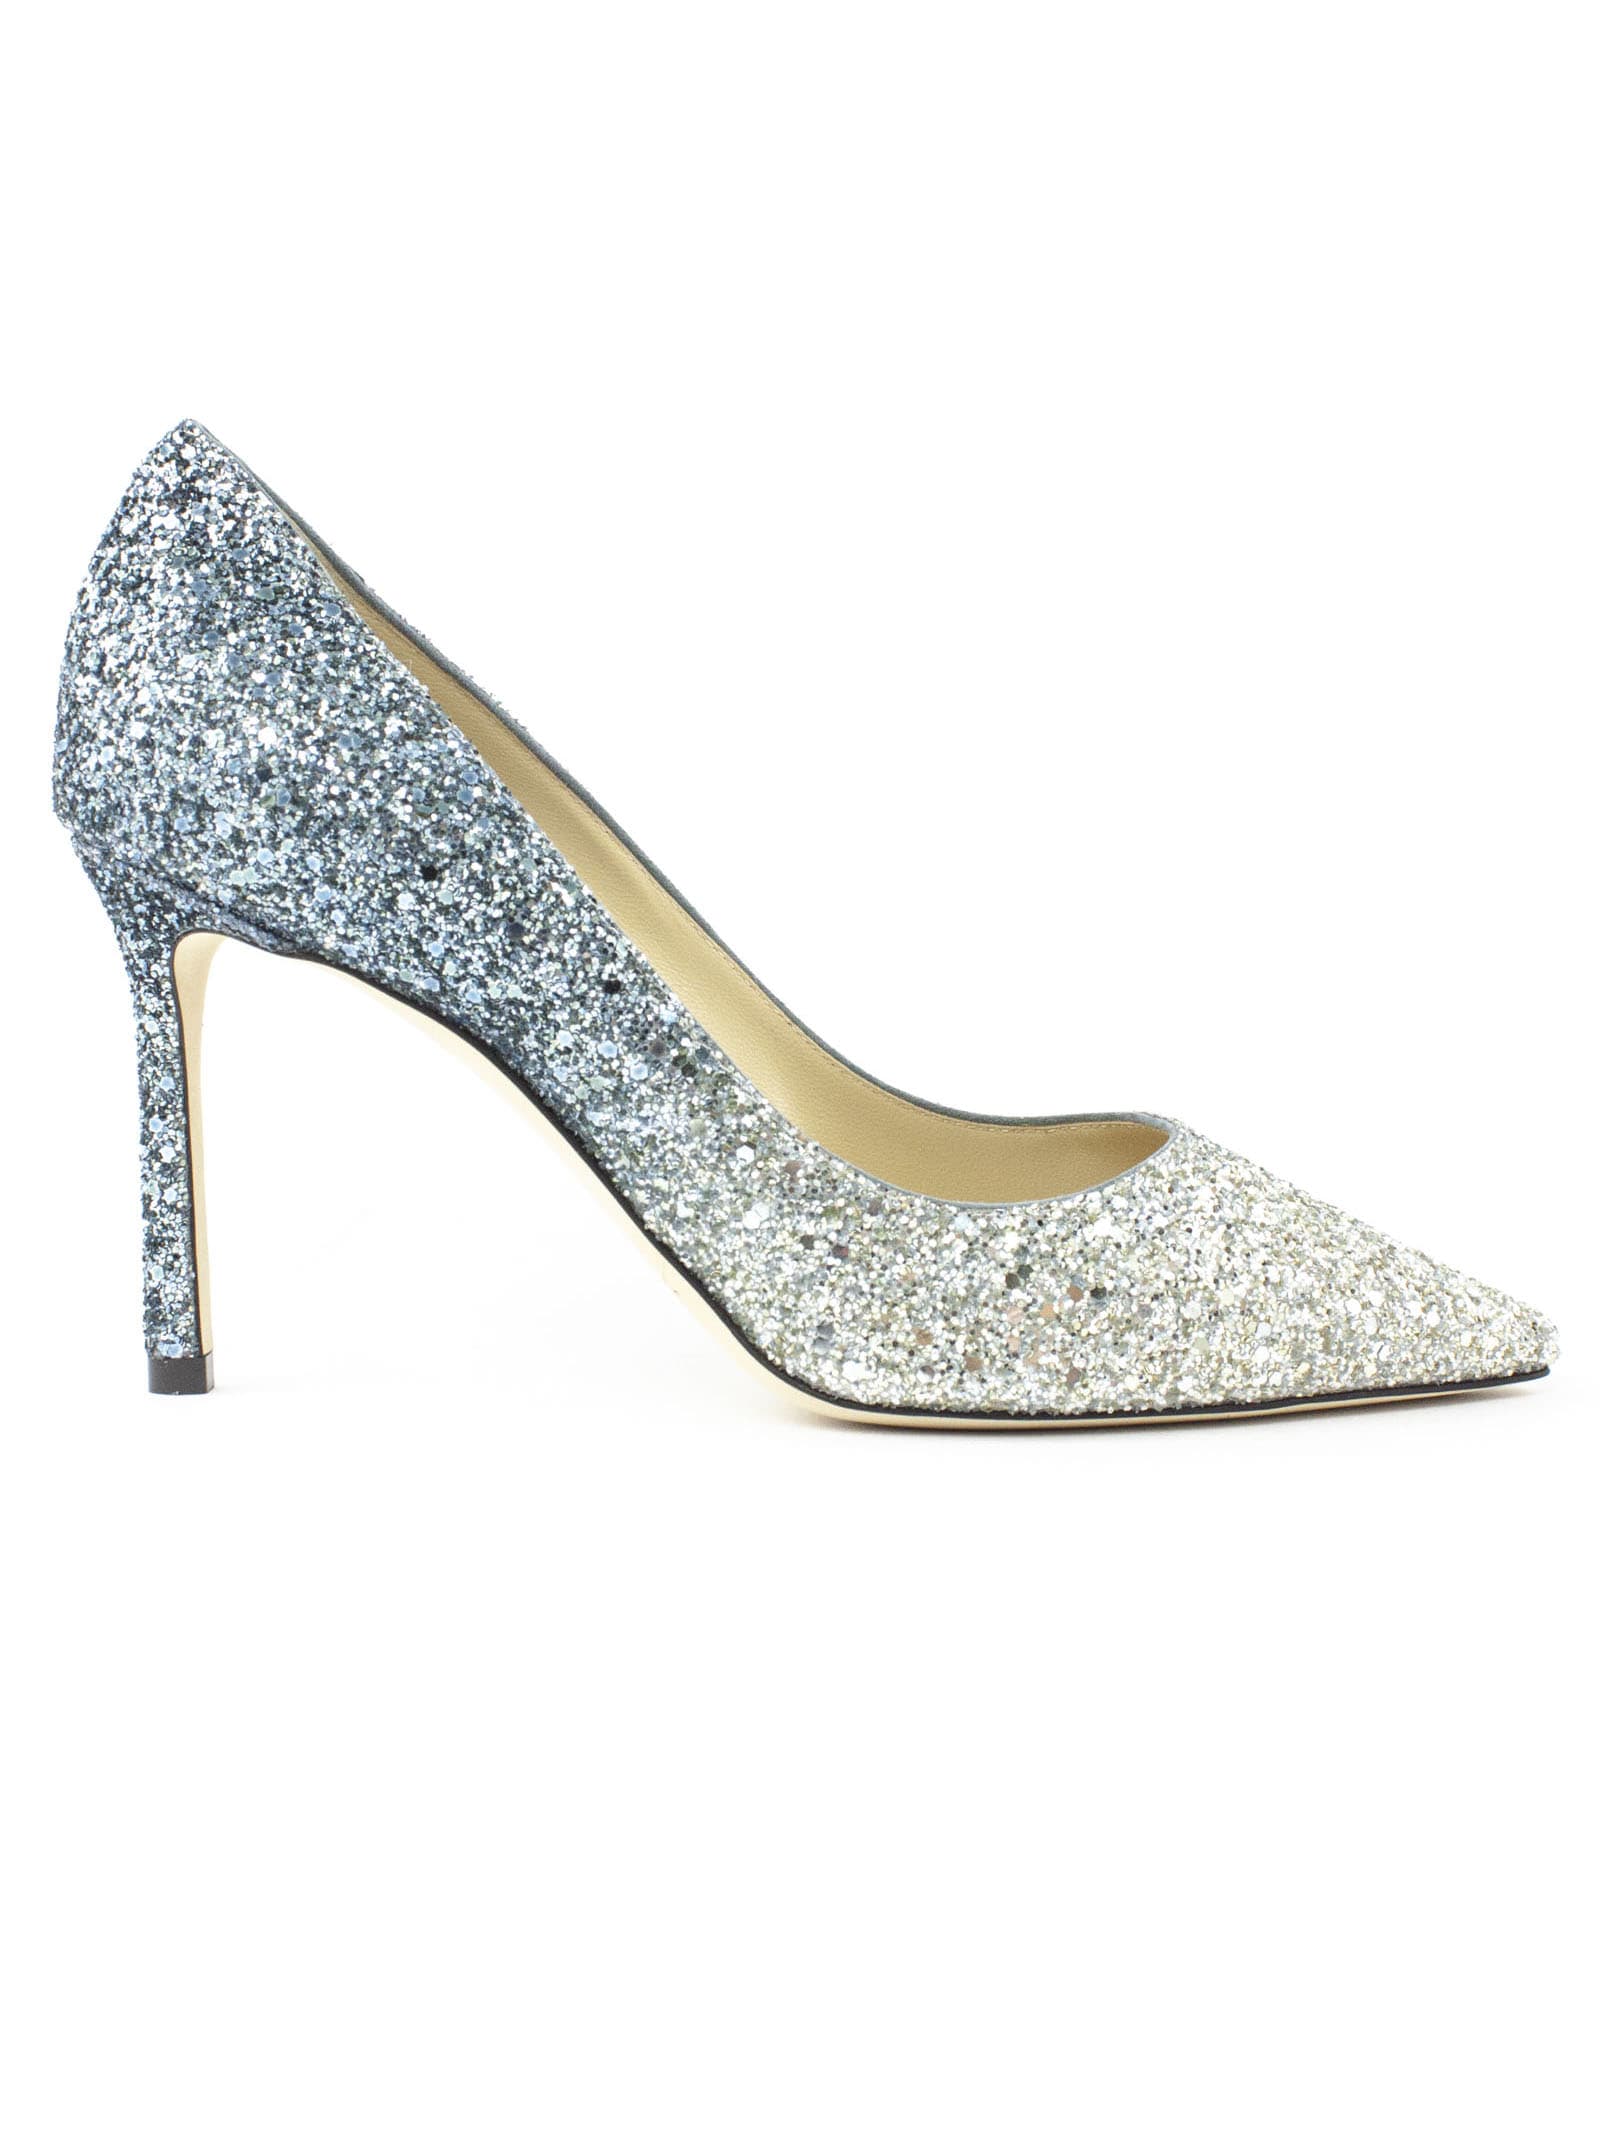 Buy Jimmy Choo Blue And Silver Glitter Pumps online, shop Jimmy Choo shoes with free shipping